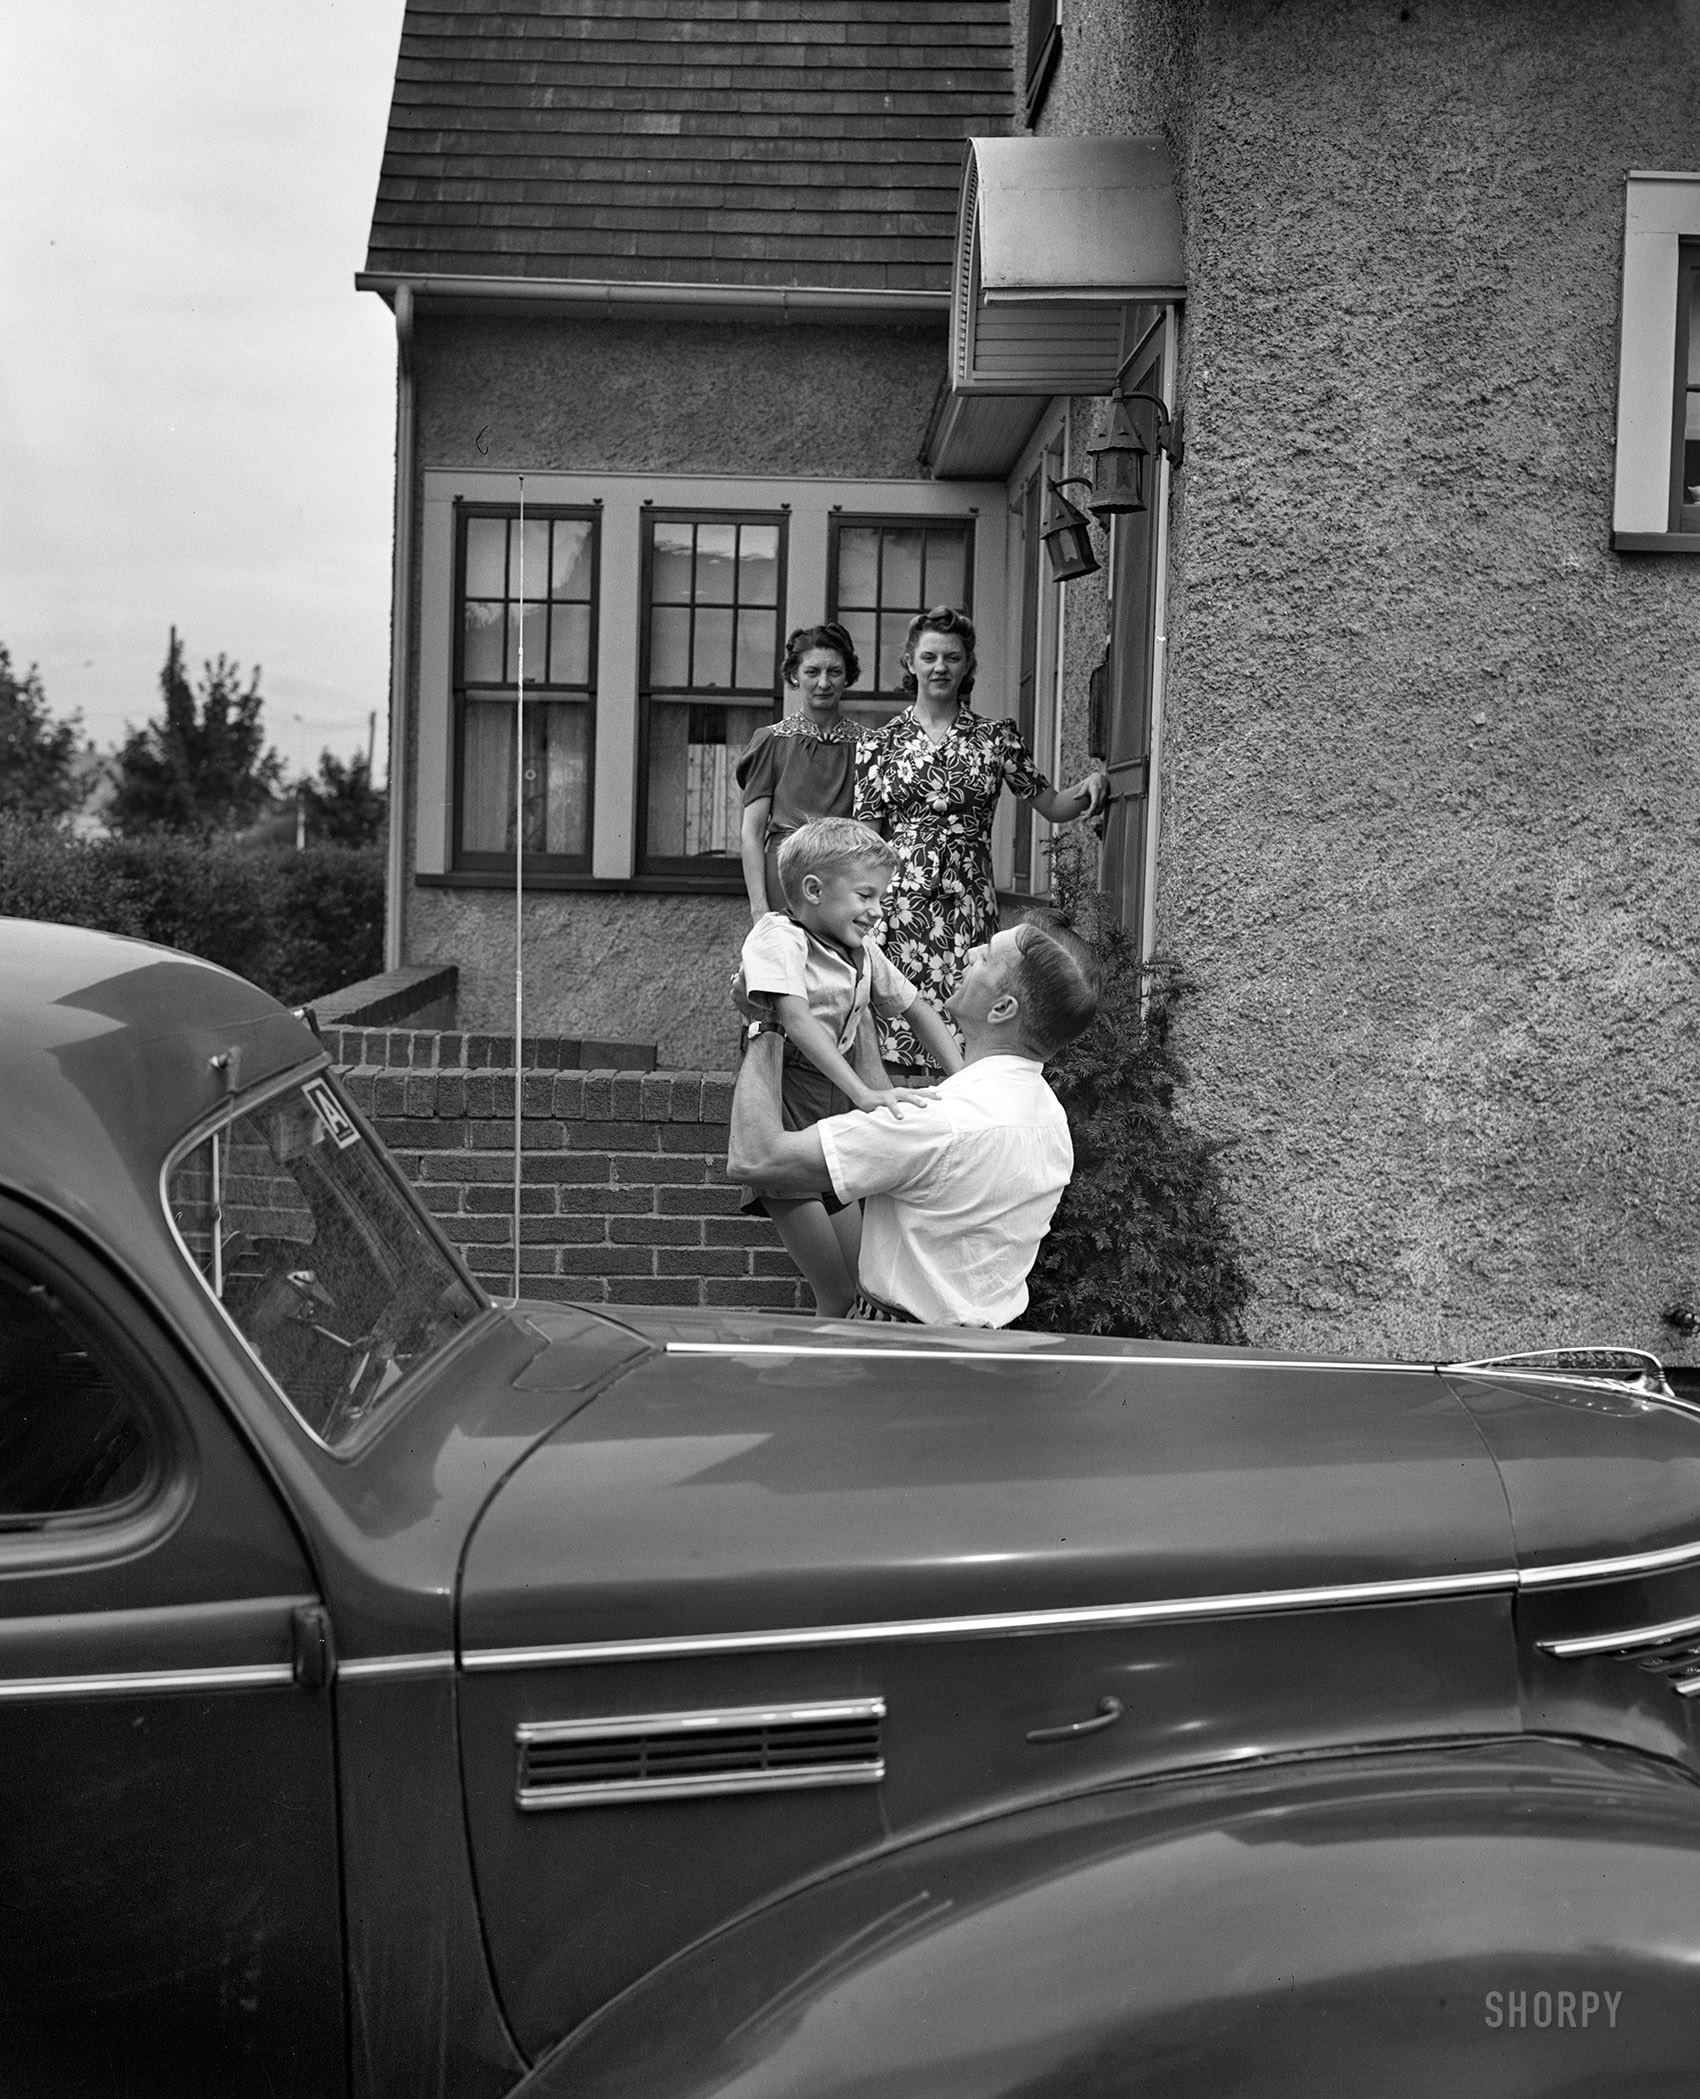 September 1942. "Rochester, New York. Mrs. Babcock, Shirley and Earl greeting Mr. Babcock in front of the house." The nucleus of this nuclear family, orbited by his little electron. Large format negative by Ralph Amdursky. View full size.